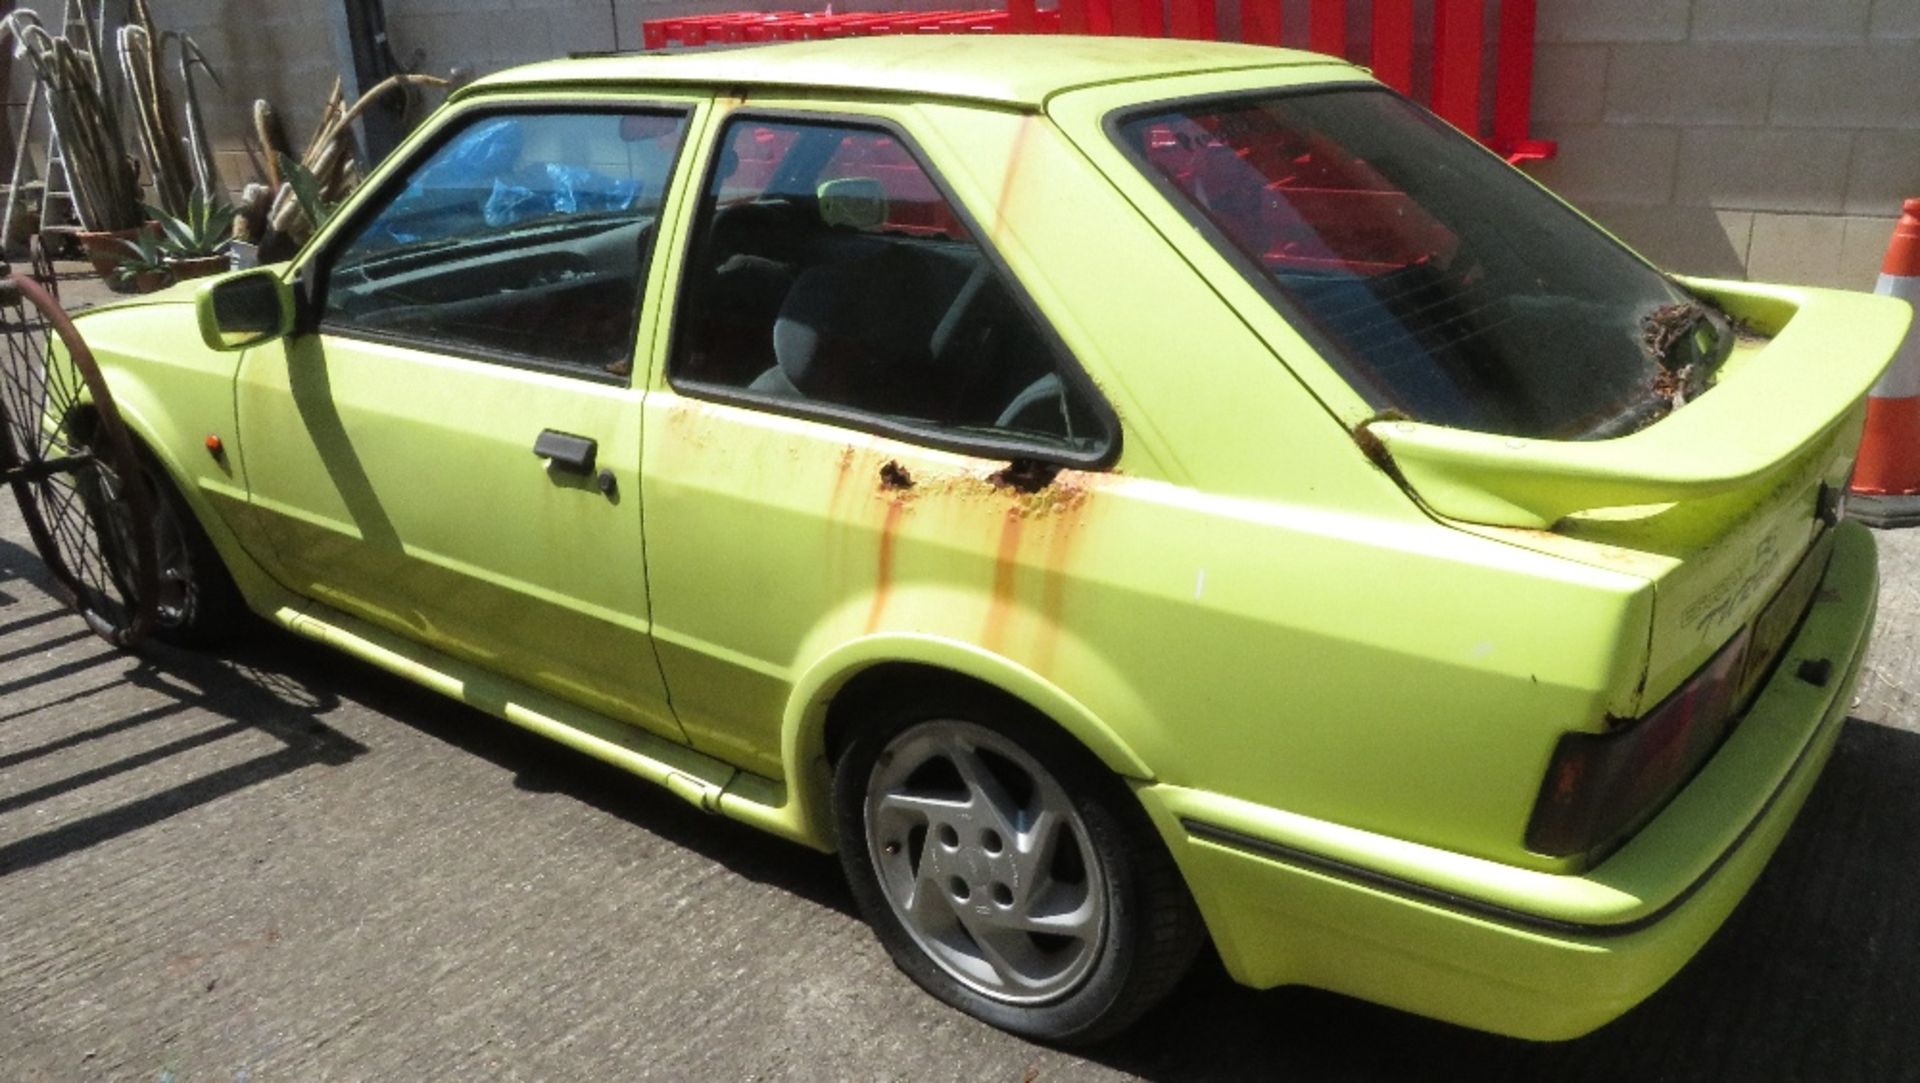 Ford RS Turbo, 2 door Reg no D378 RKM, we have keys & V5, the vehicle appears to be original with - Image 6 of 12